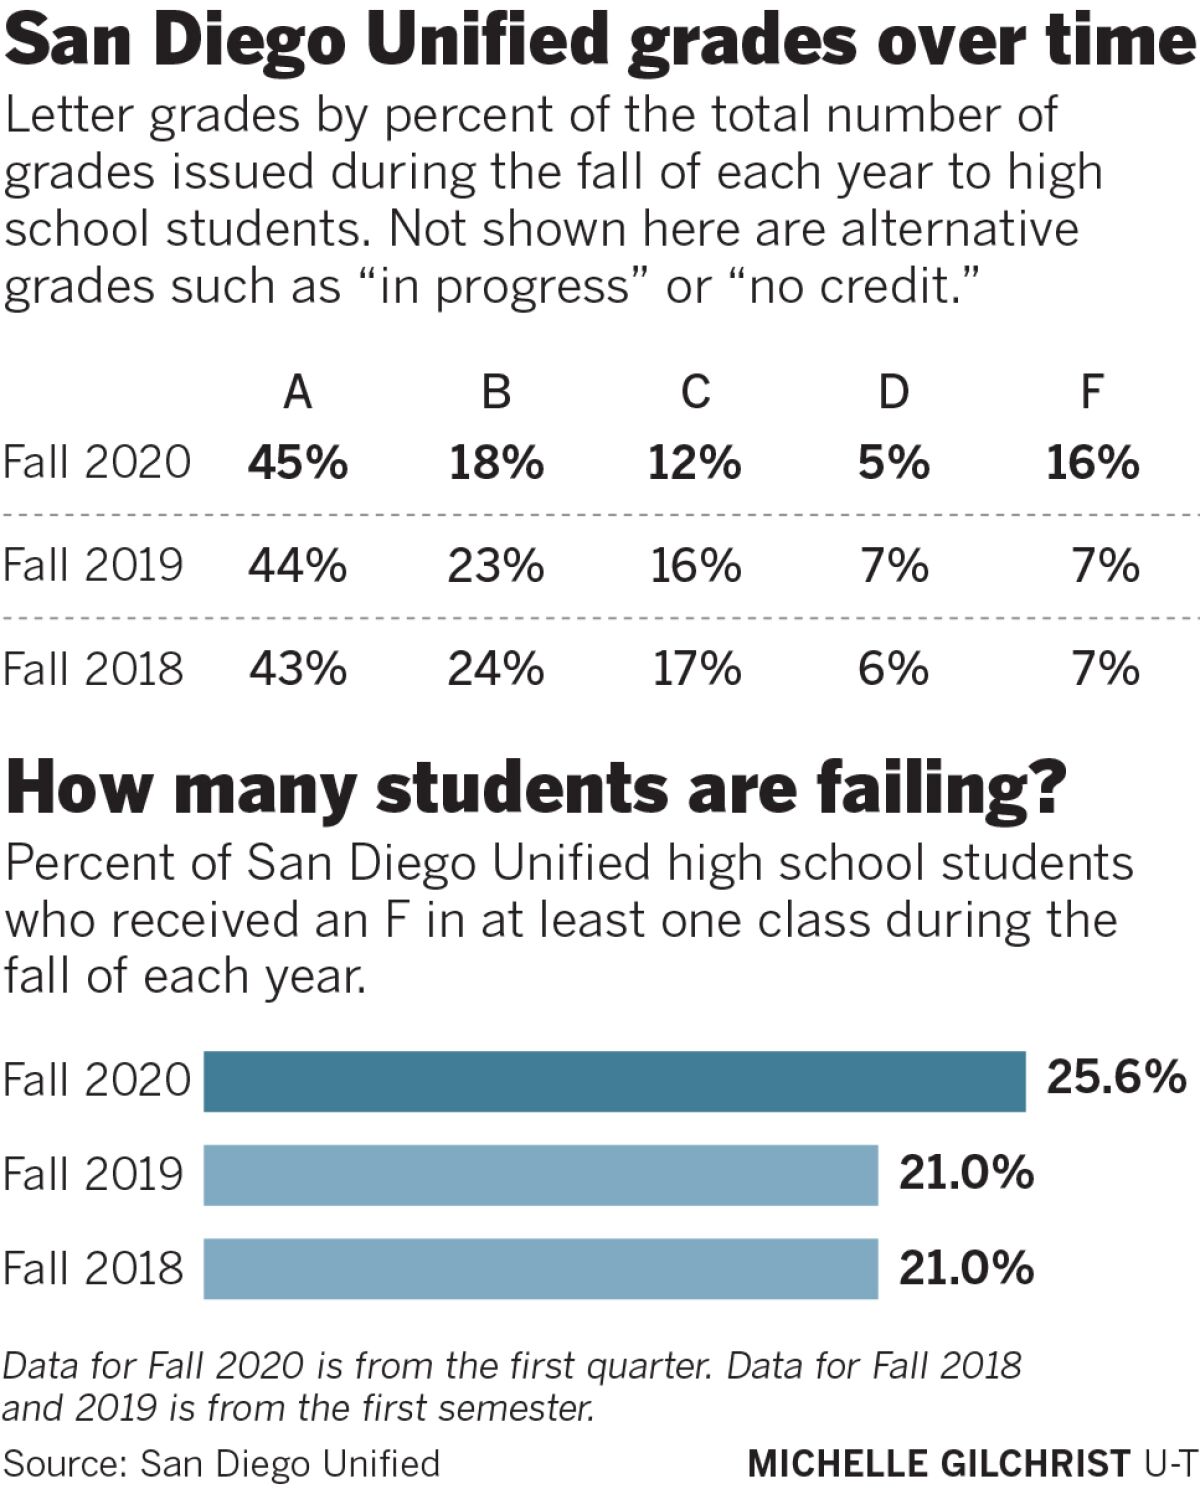 SAN DIEGO UNIFIED GRADES OVER TIME